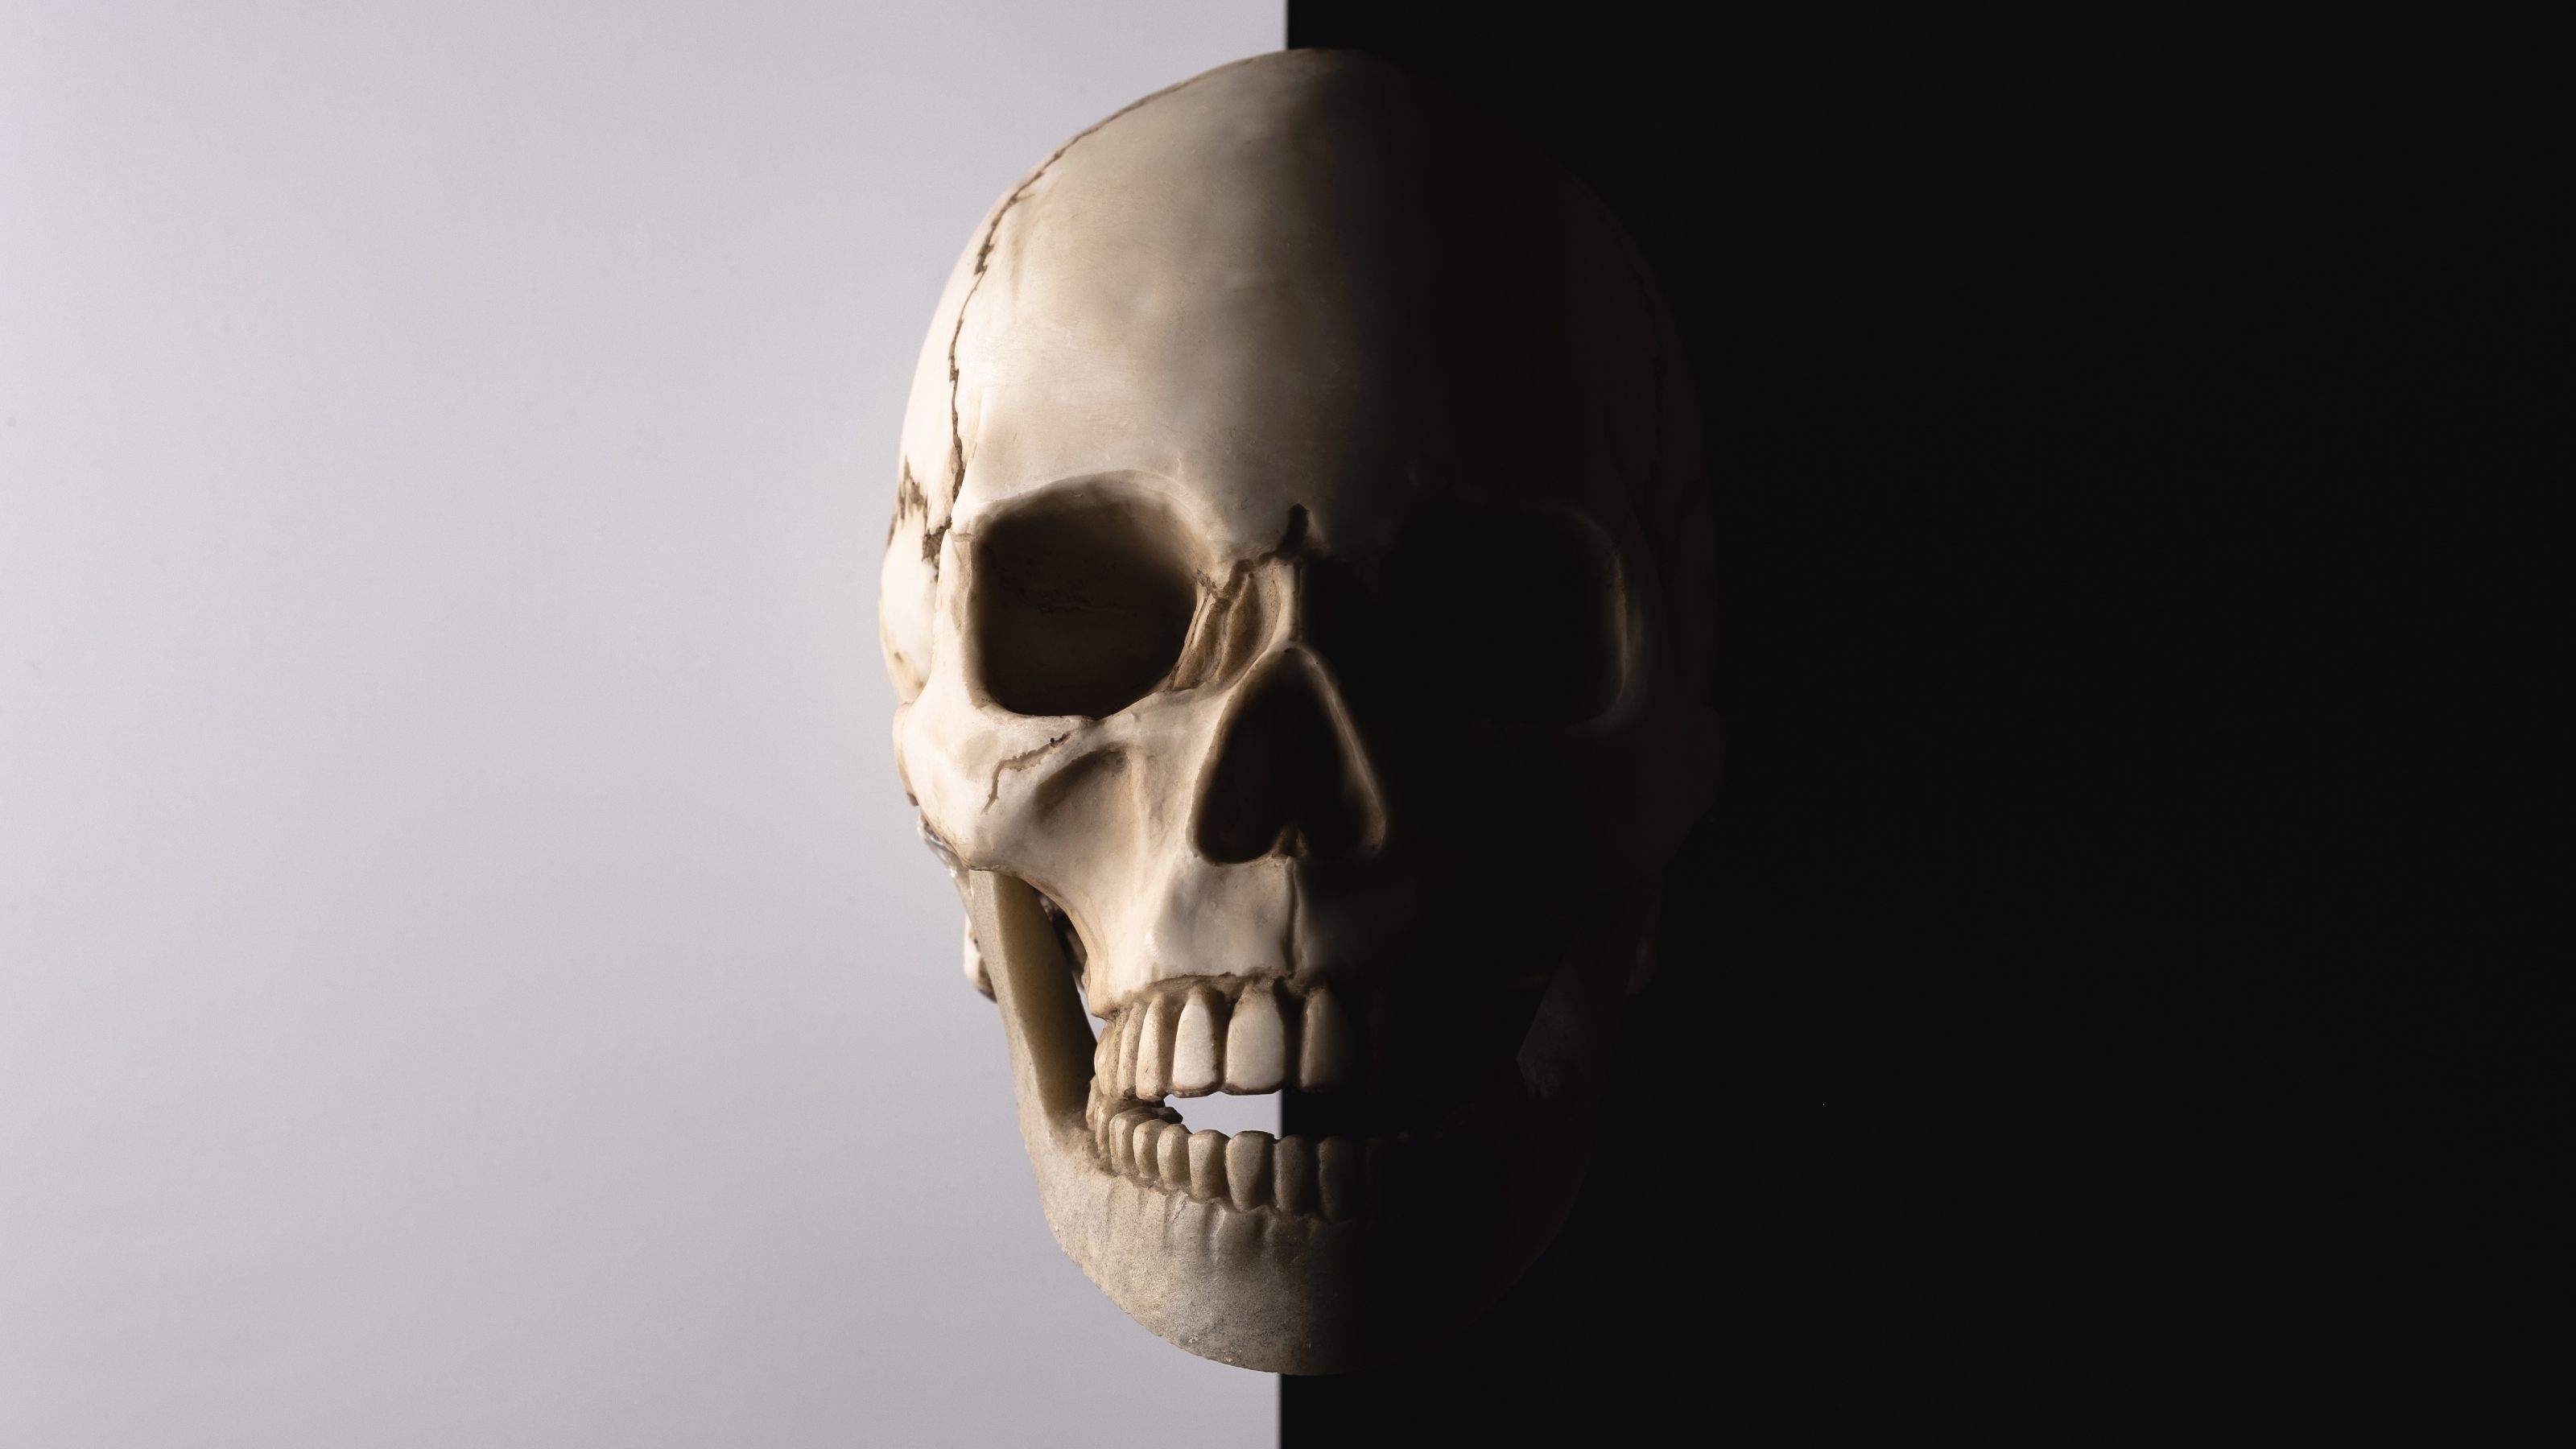 a human skull is shown against a white background.